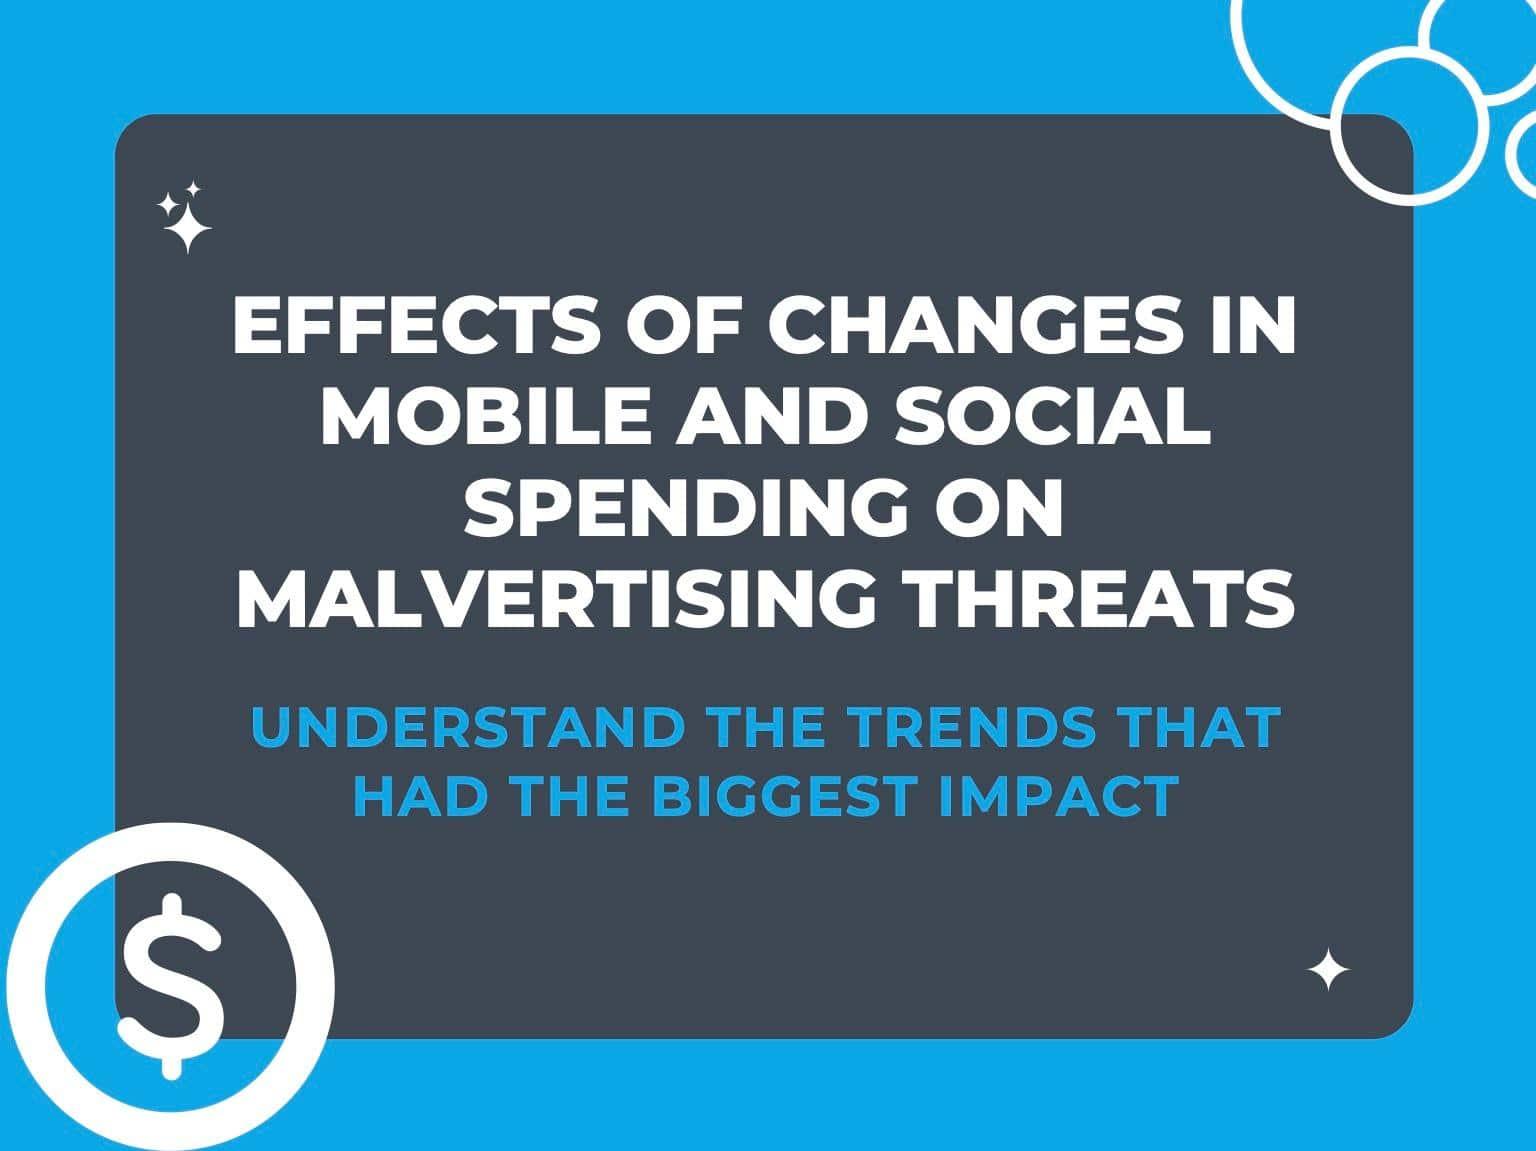 [New Research] Effects of Changes in Mobile and Social Spending on Malvertising Threats